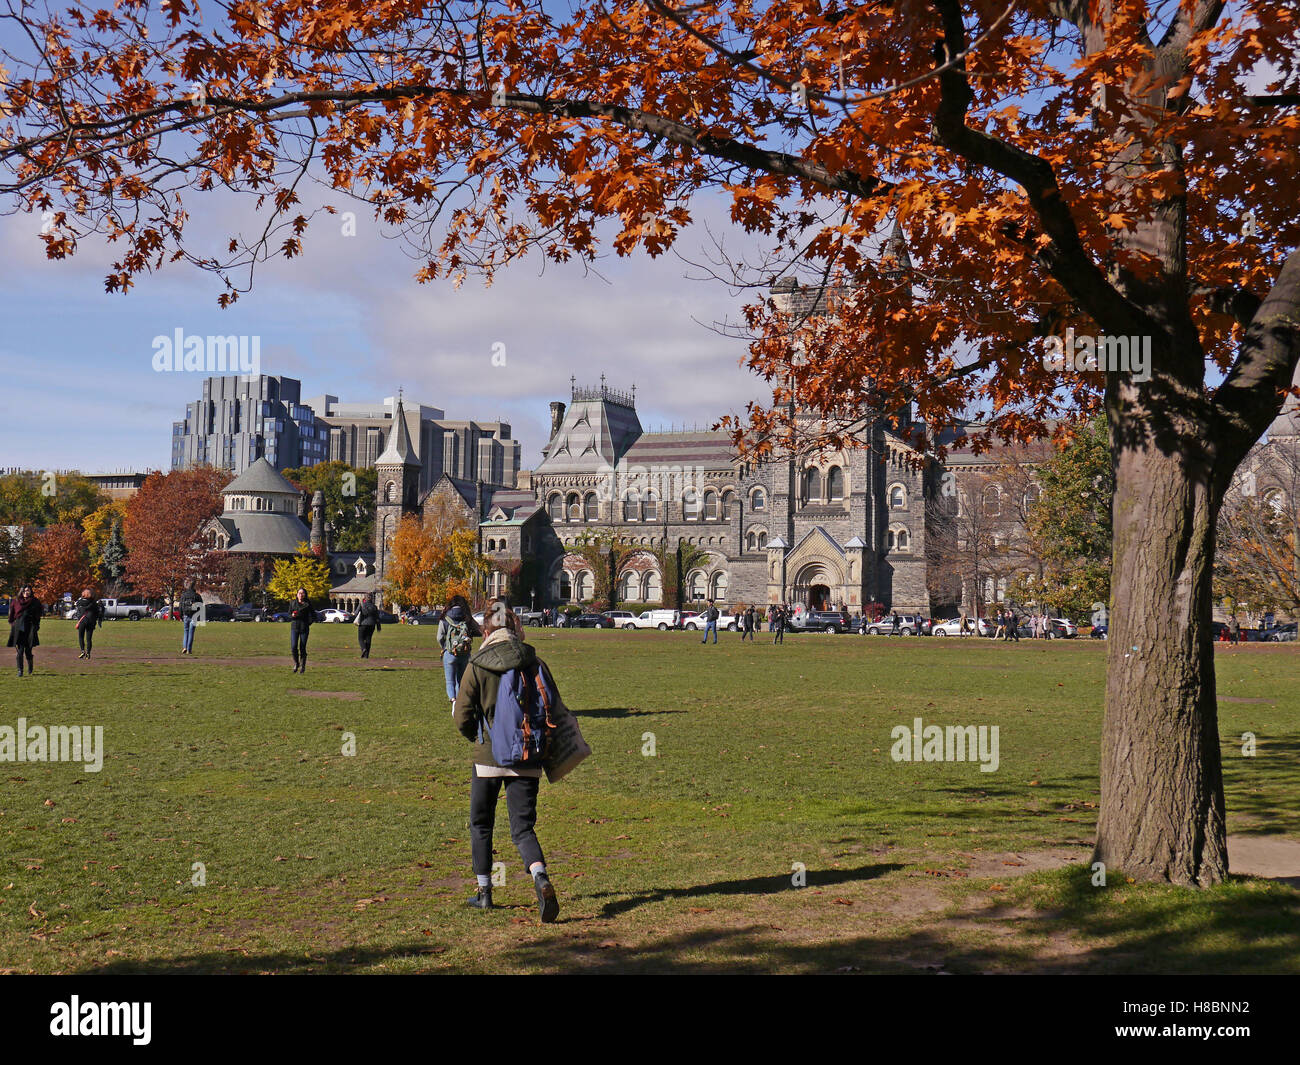 oak trees in fall colors on University of Toronto campus Stock Photo